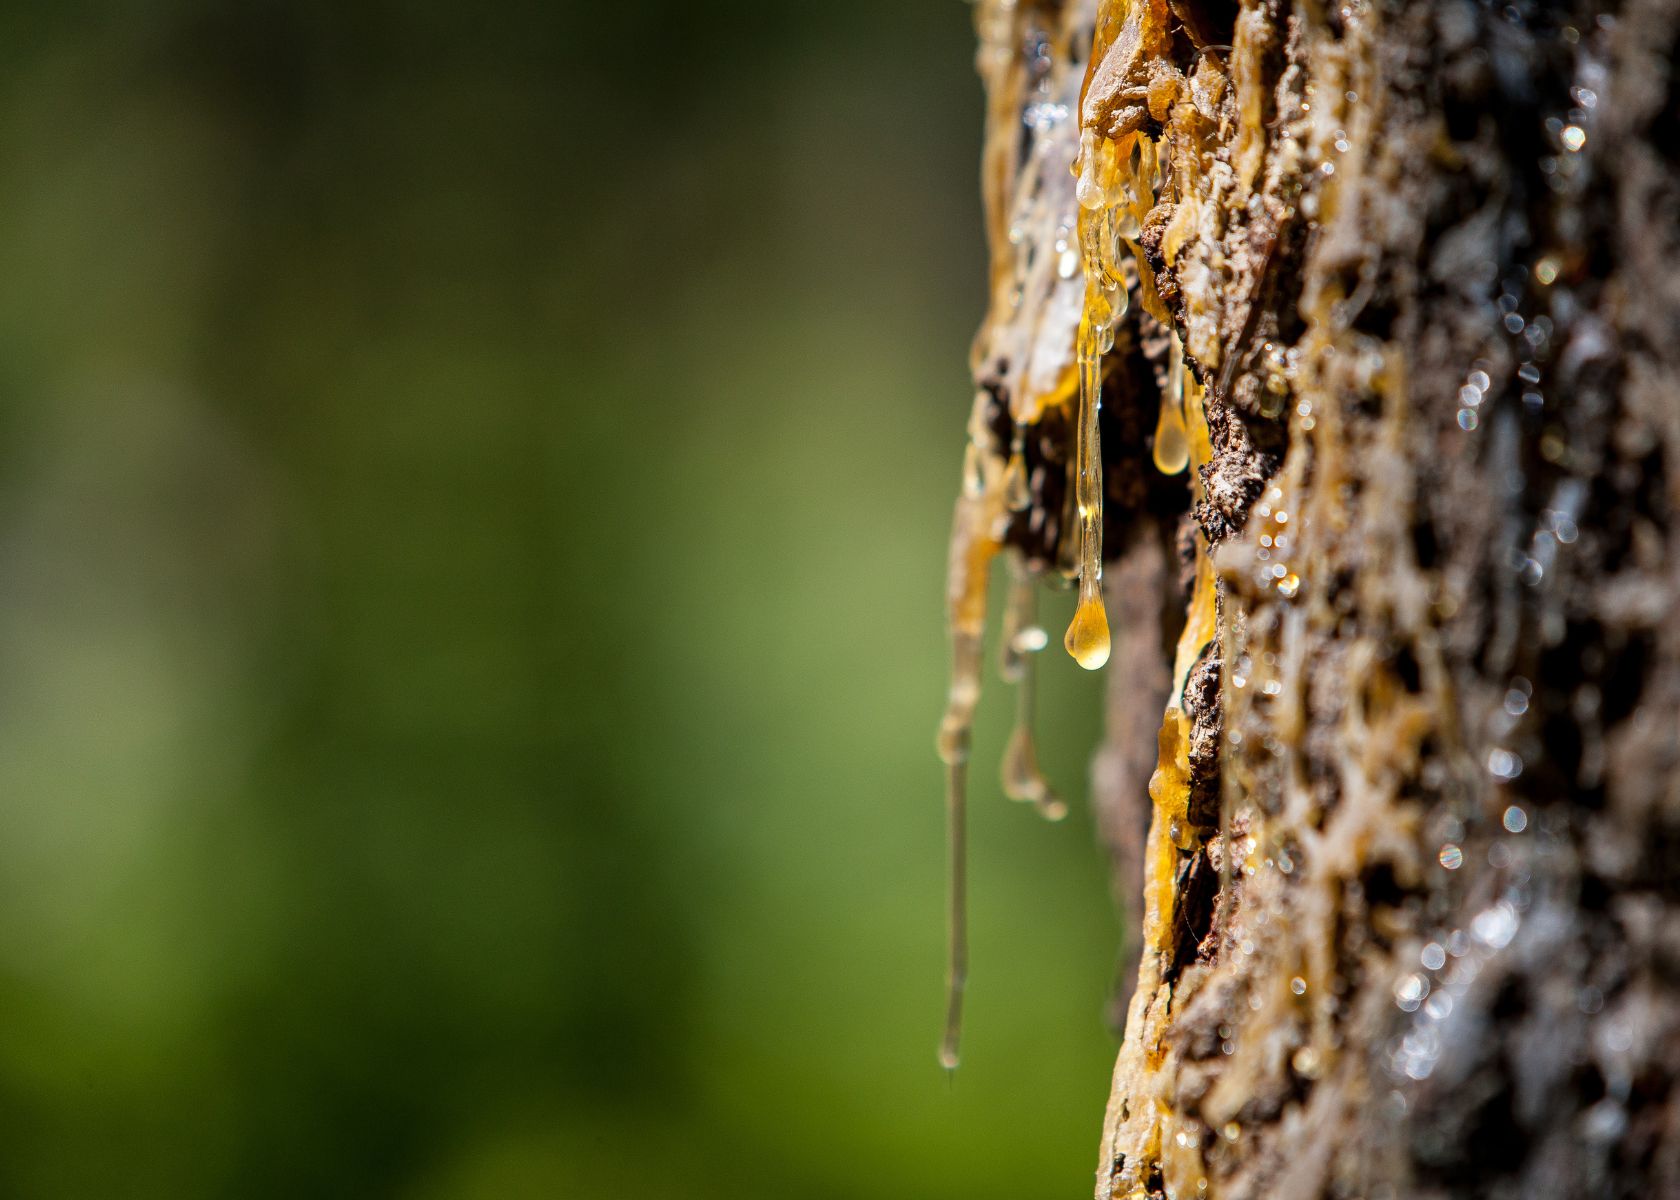 How to get tree sap off skin and hair